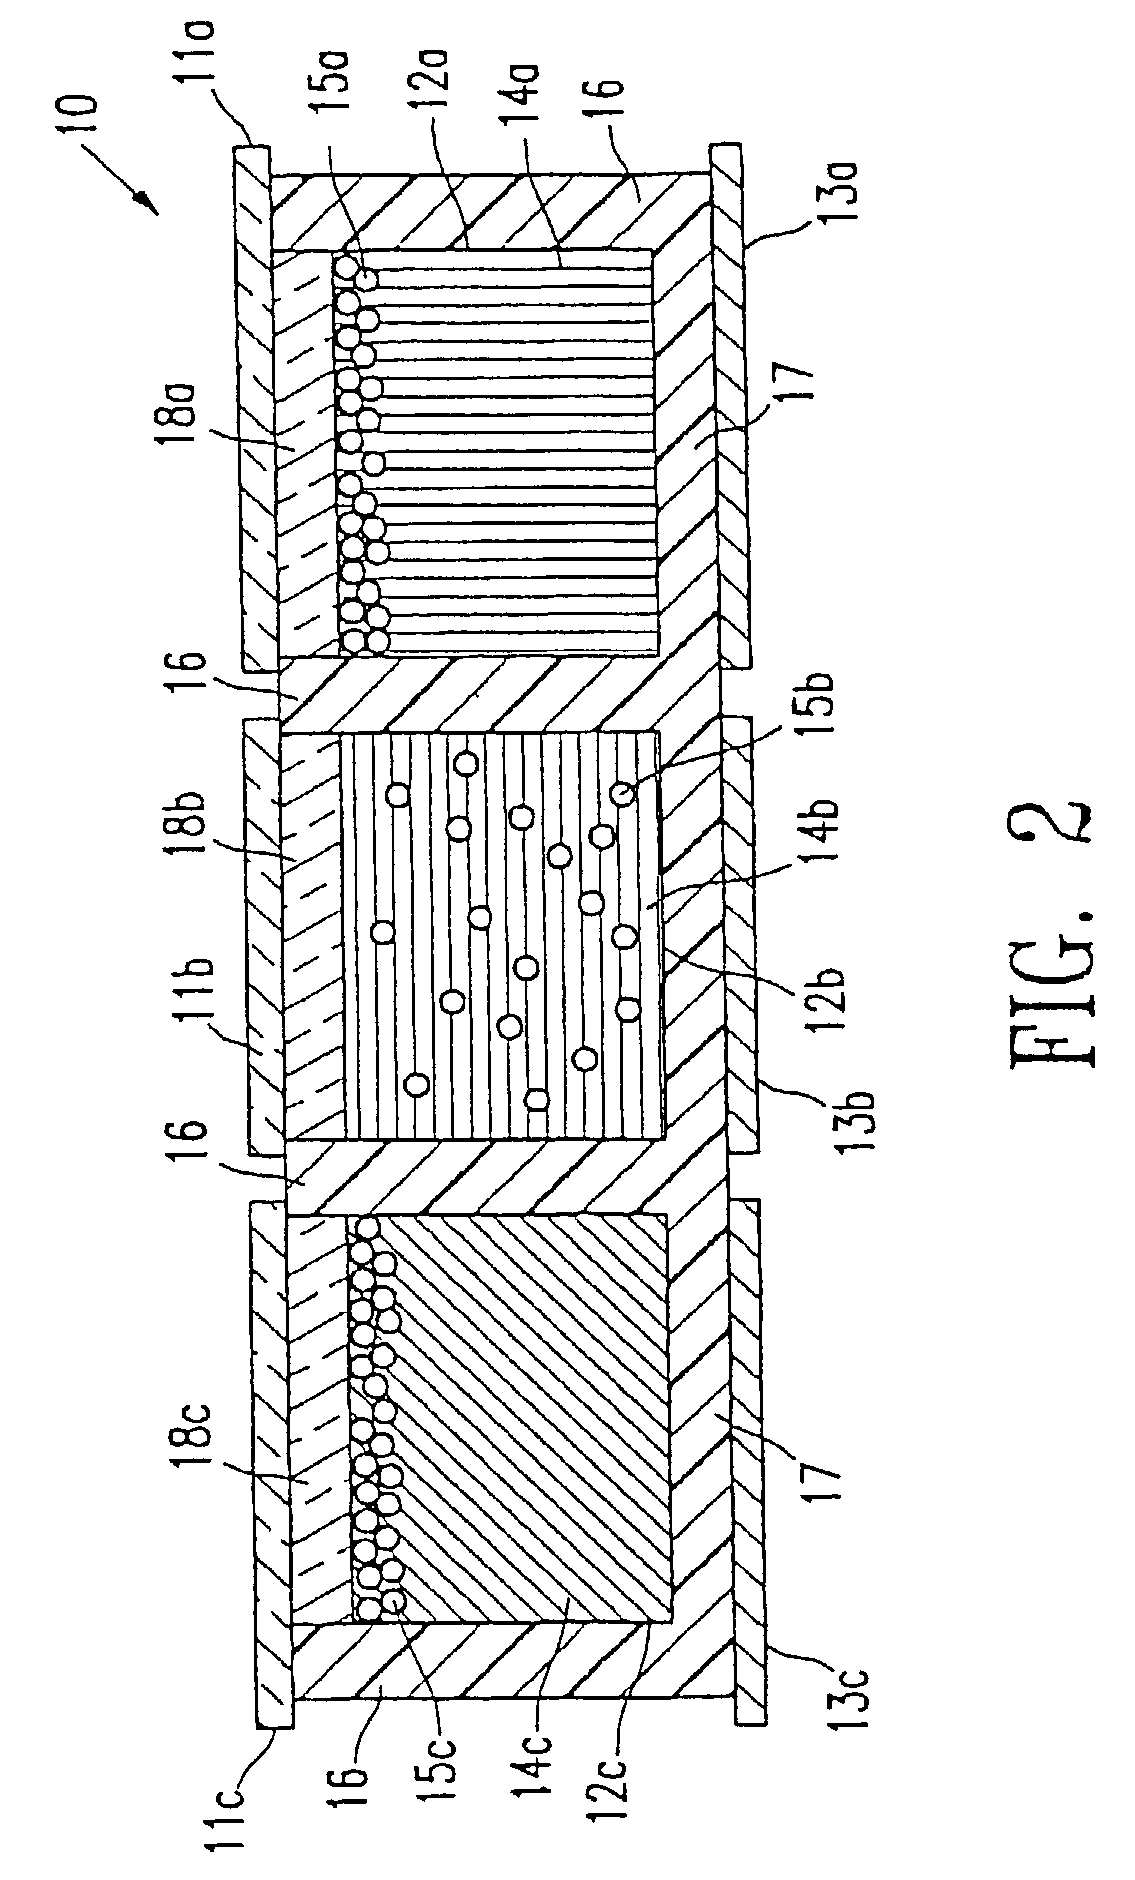 Composition and process for the sealing of microcups in roll-to-roll display manufacturing